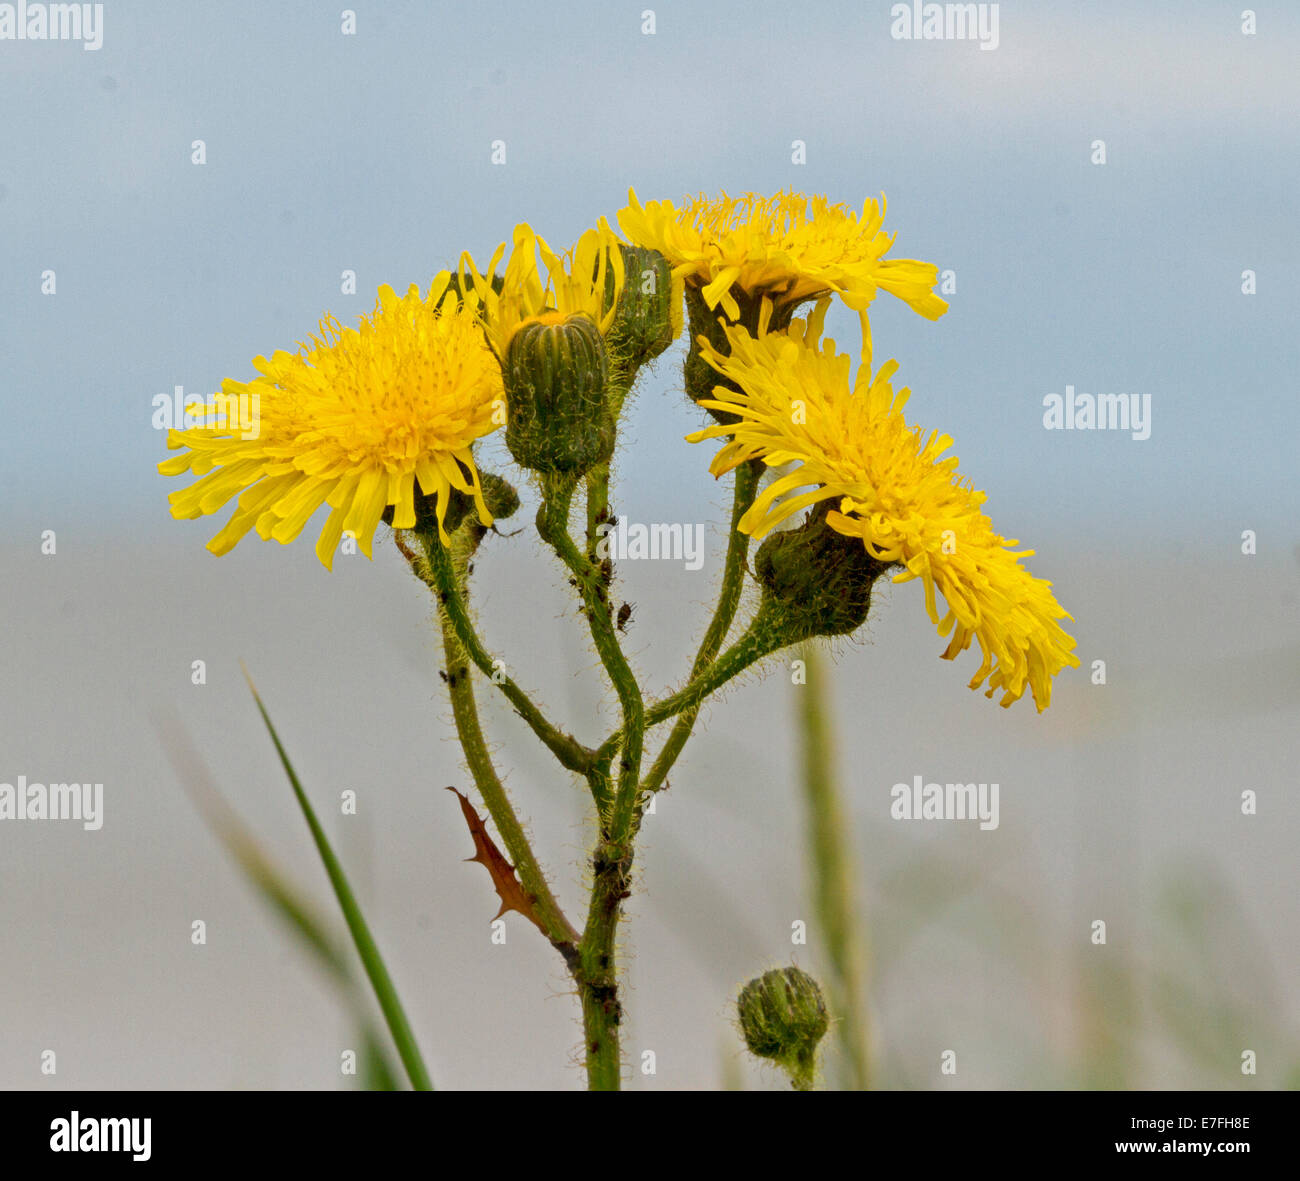 Cluster of bright yellow flowers - dandelion, Taraxacum officinale, common weed / wildflower, with background of light blue sky Stock Photo